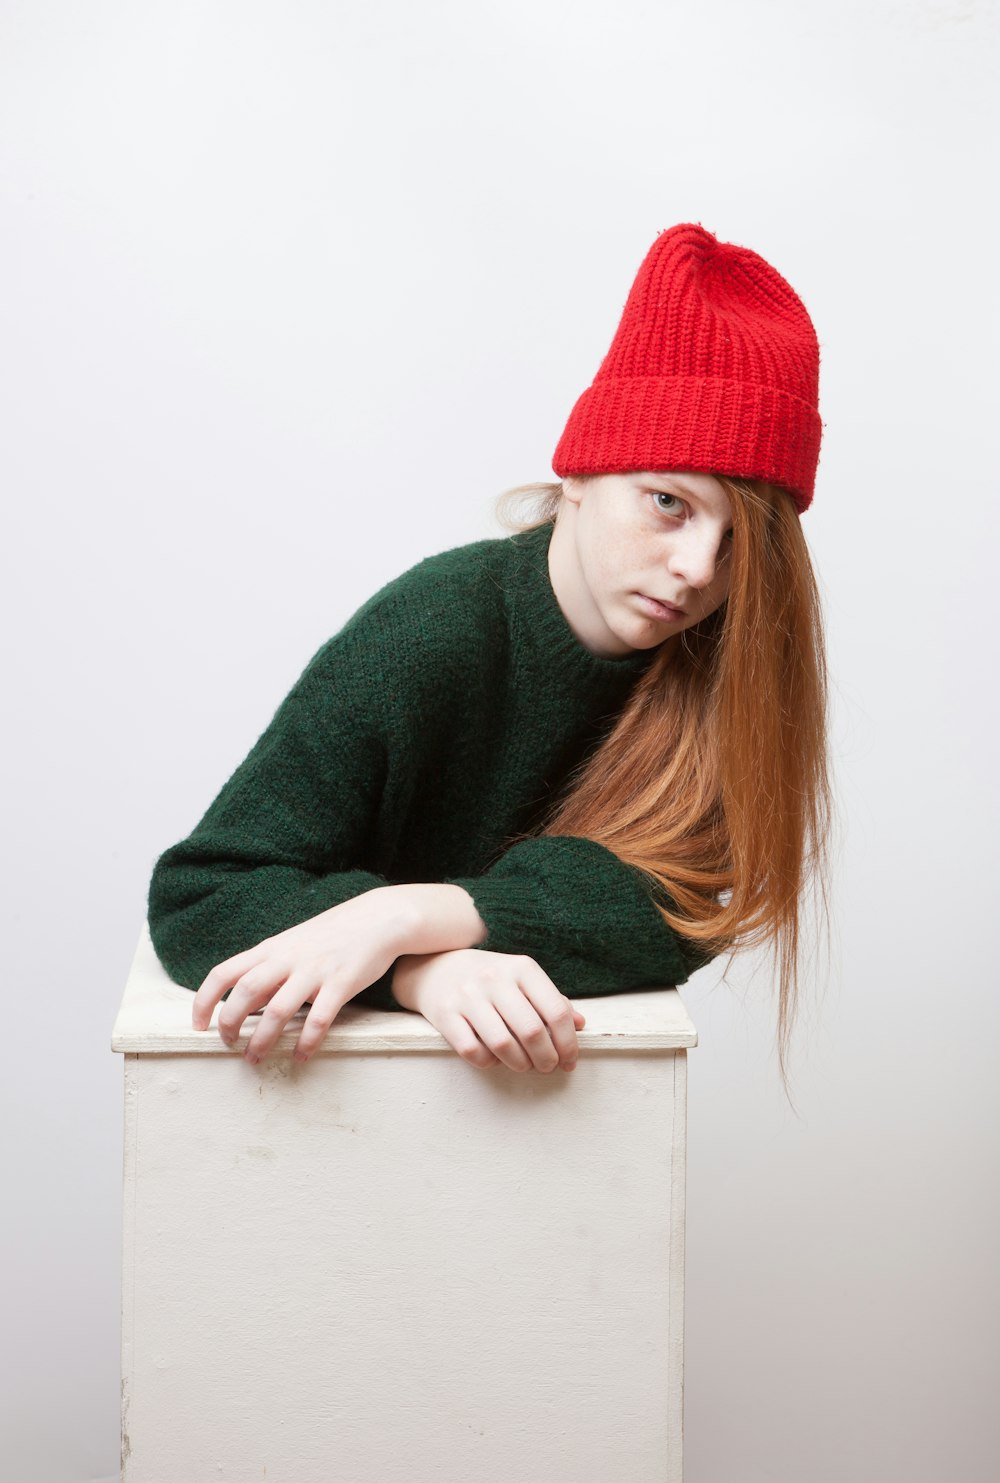 woman in green sweater and red beanie hat